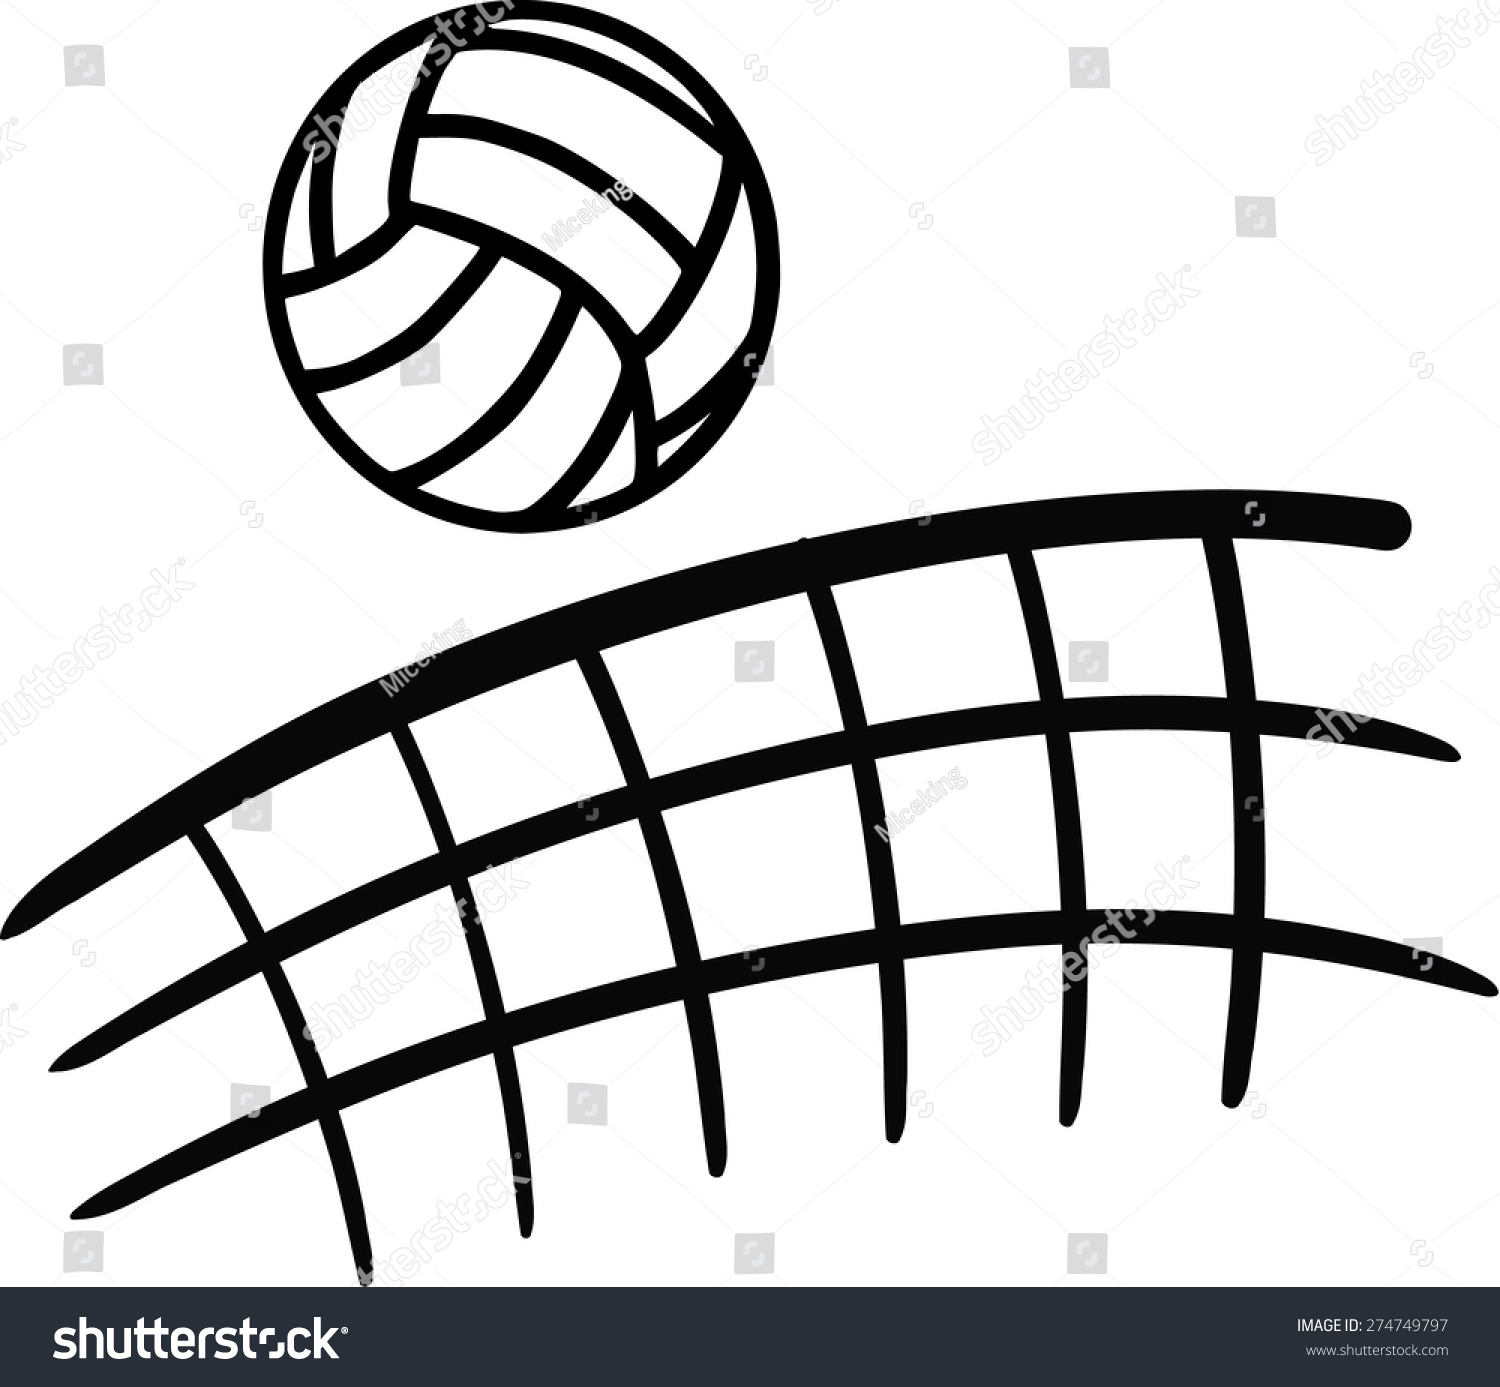 volleyball clipart vector - photo #49